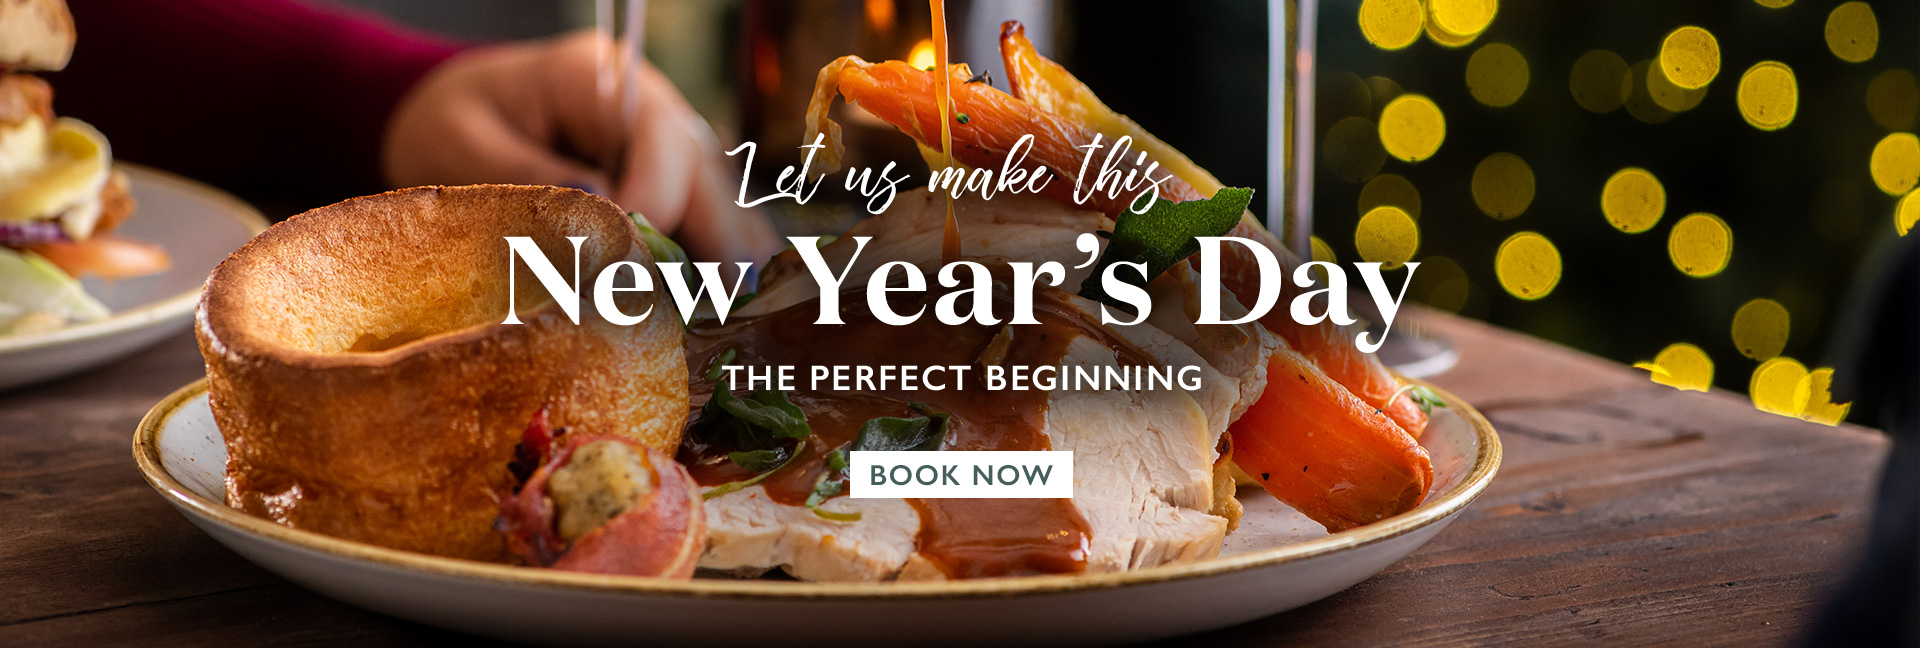 New Year’s Day Menu at The Red Lion, Alvechurch 